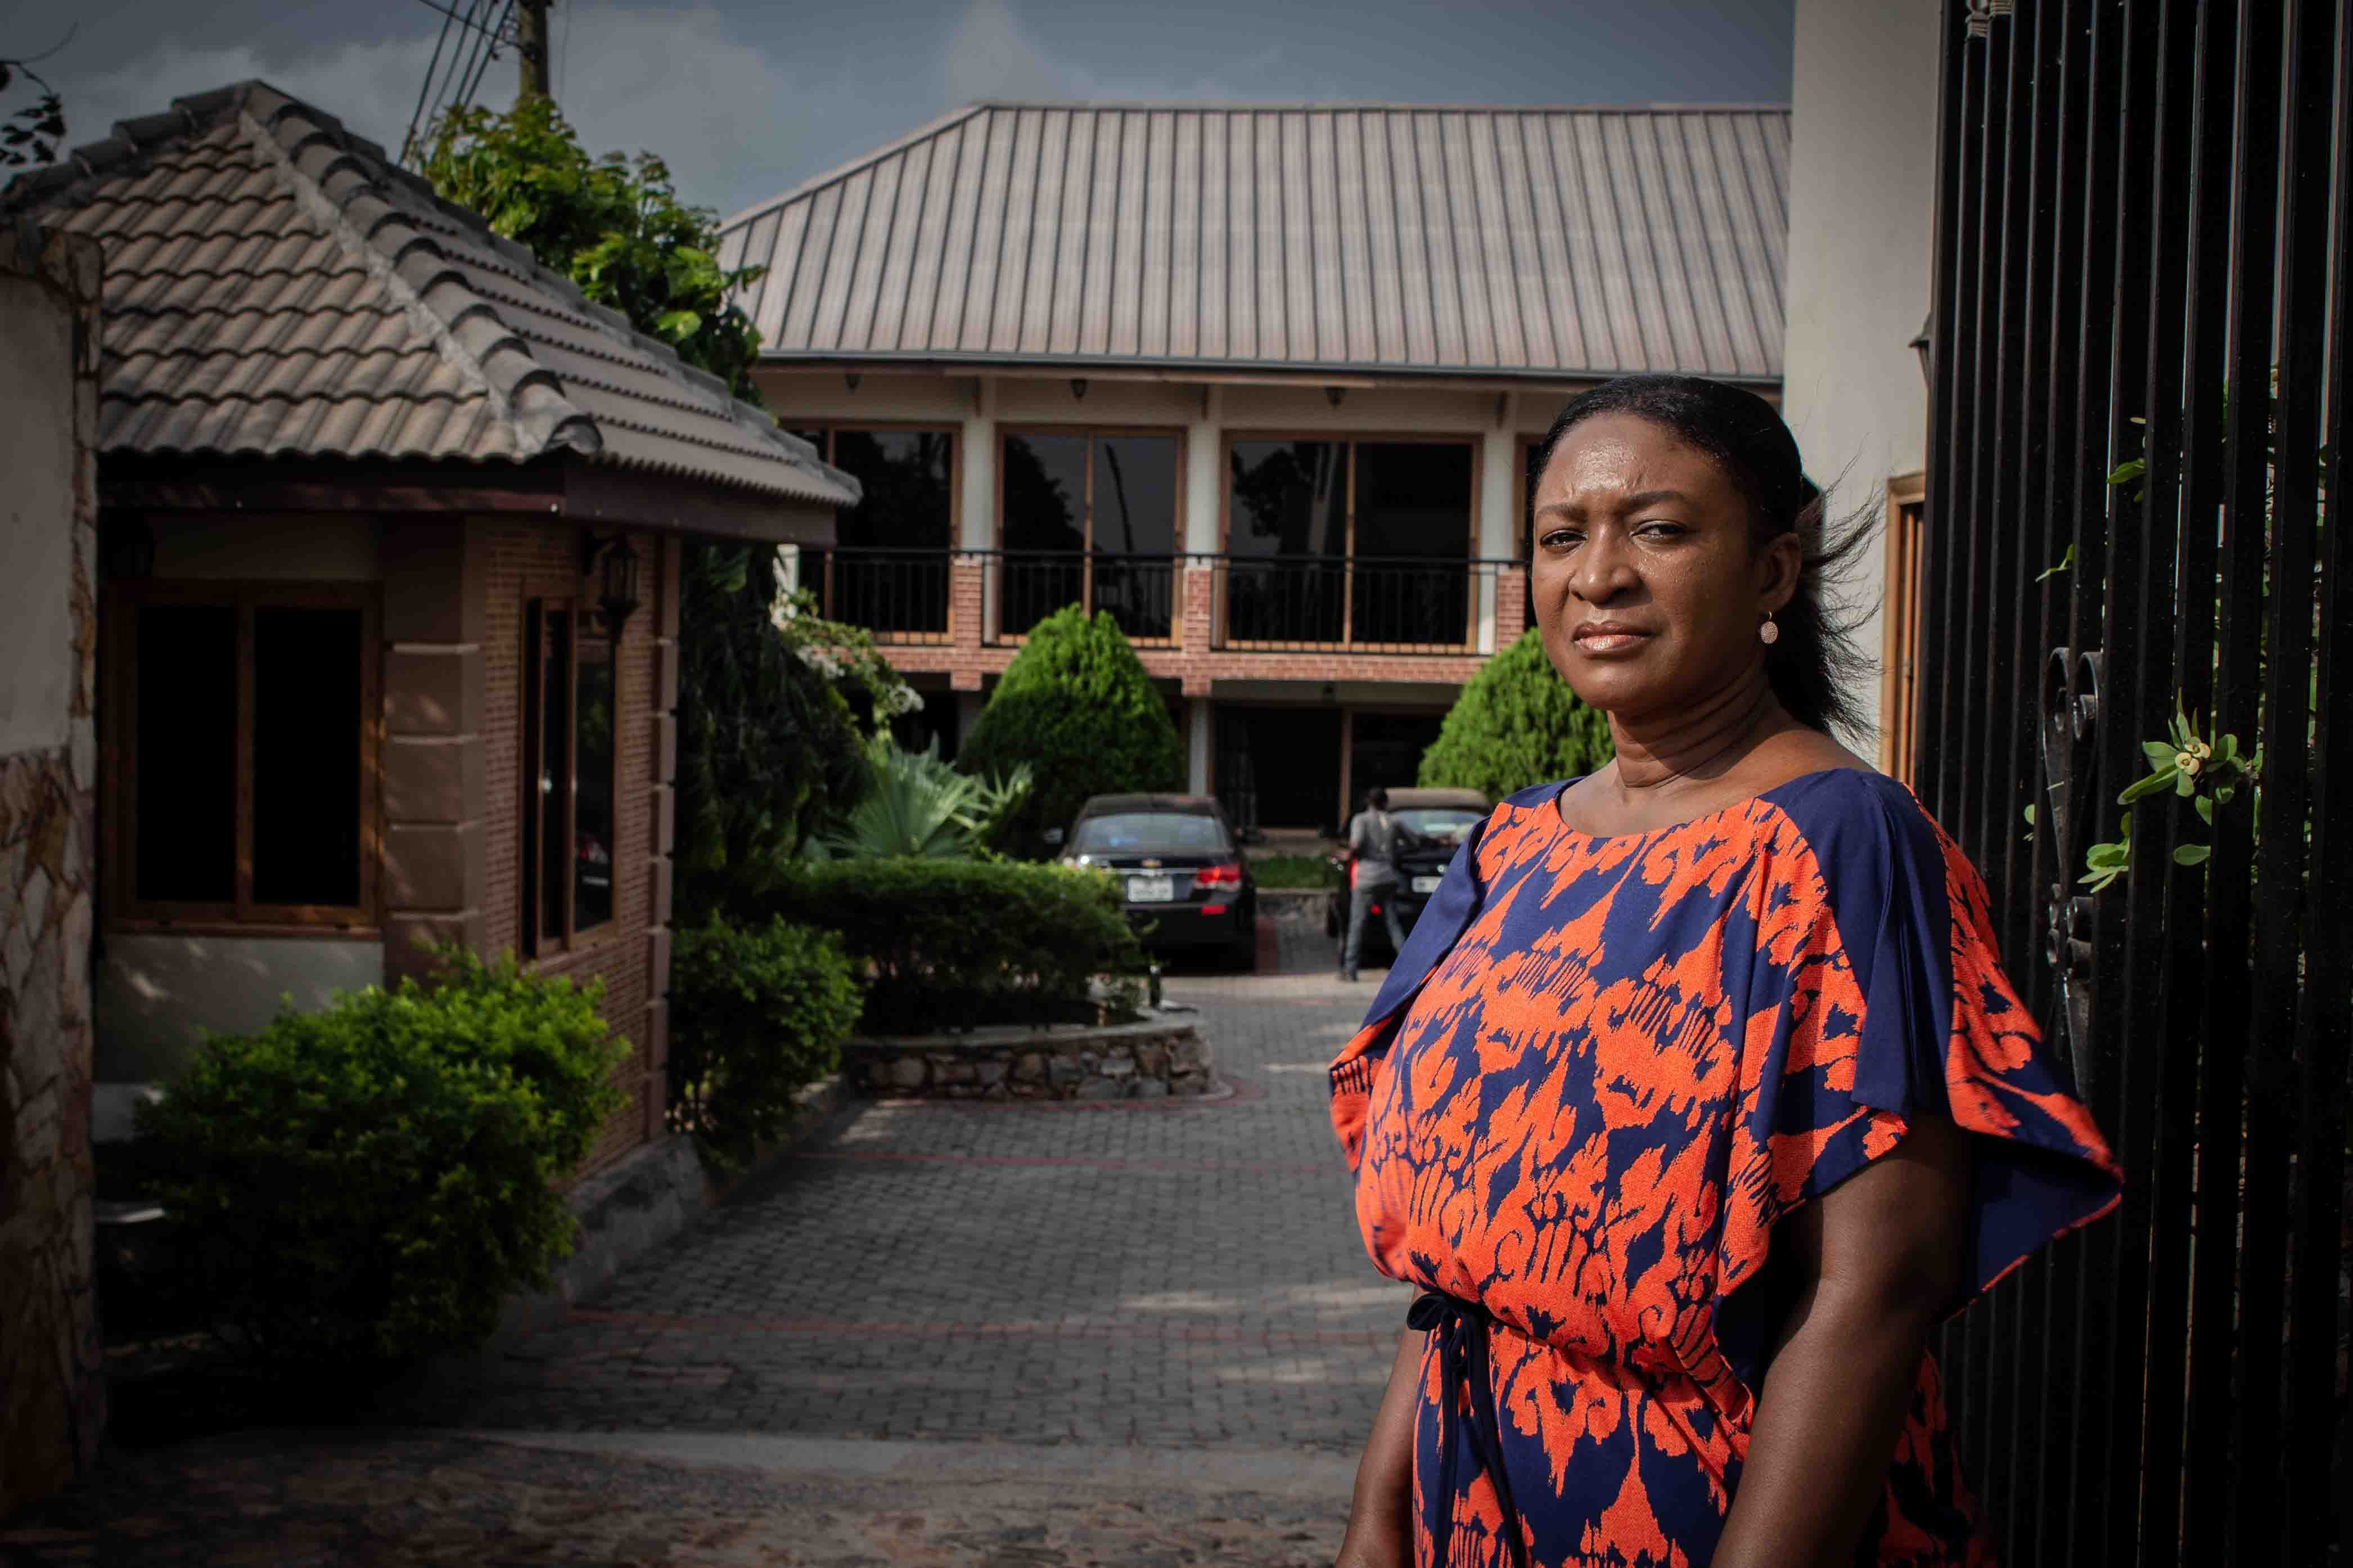 Vivian Oduro, a biotech scientist in Ghana, says it is time that scientists speak louder than the anti-GM lobby if they want to change public perception. Image by Ankur Paliwal. Ghana, 2019.